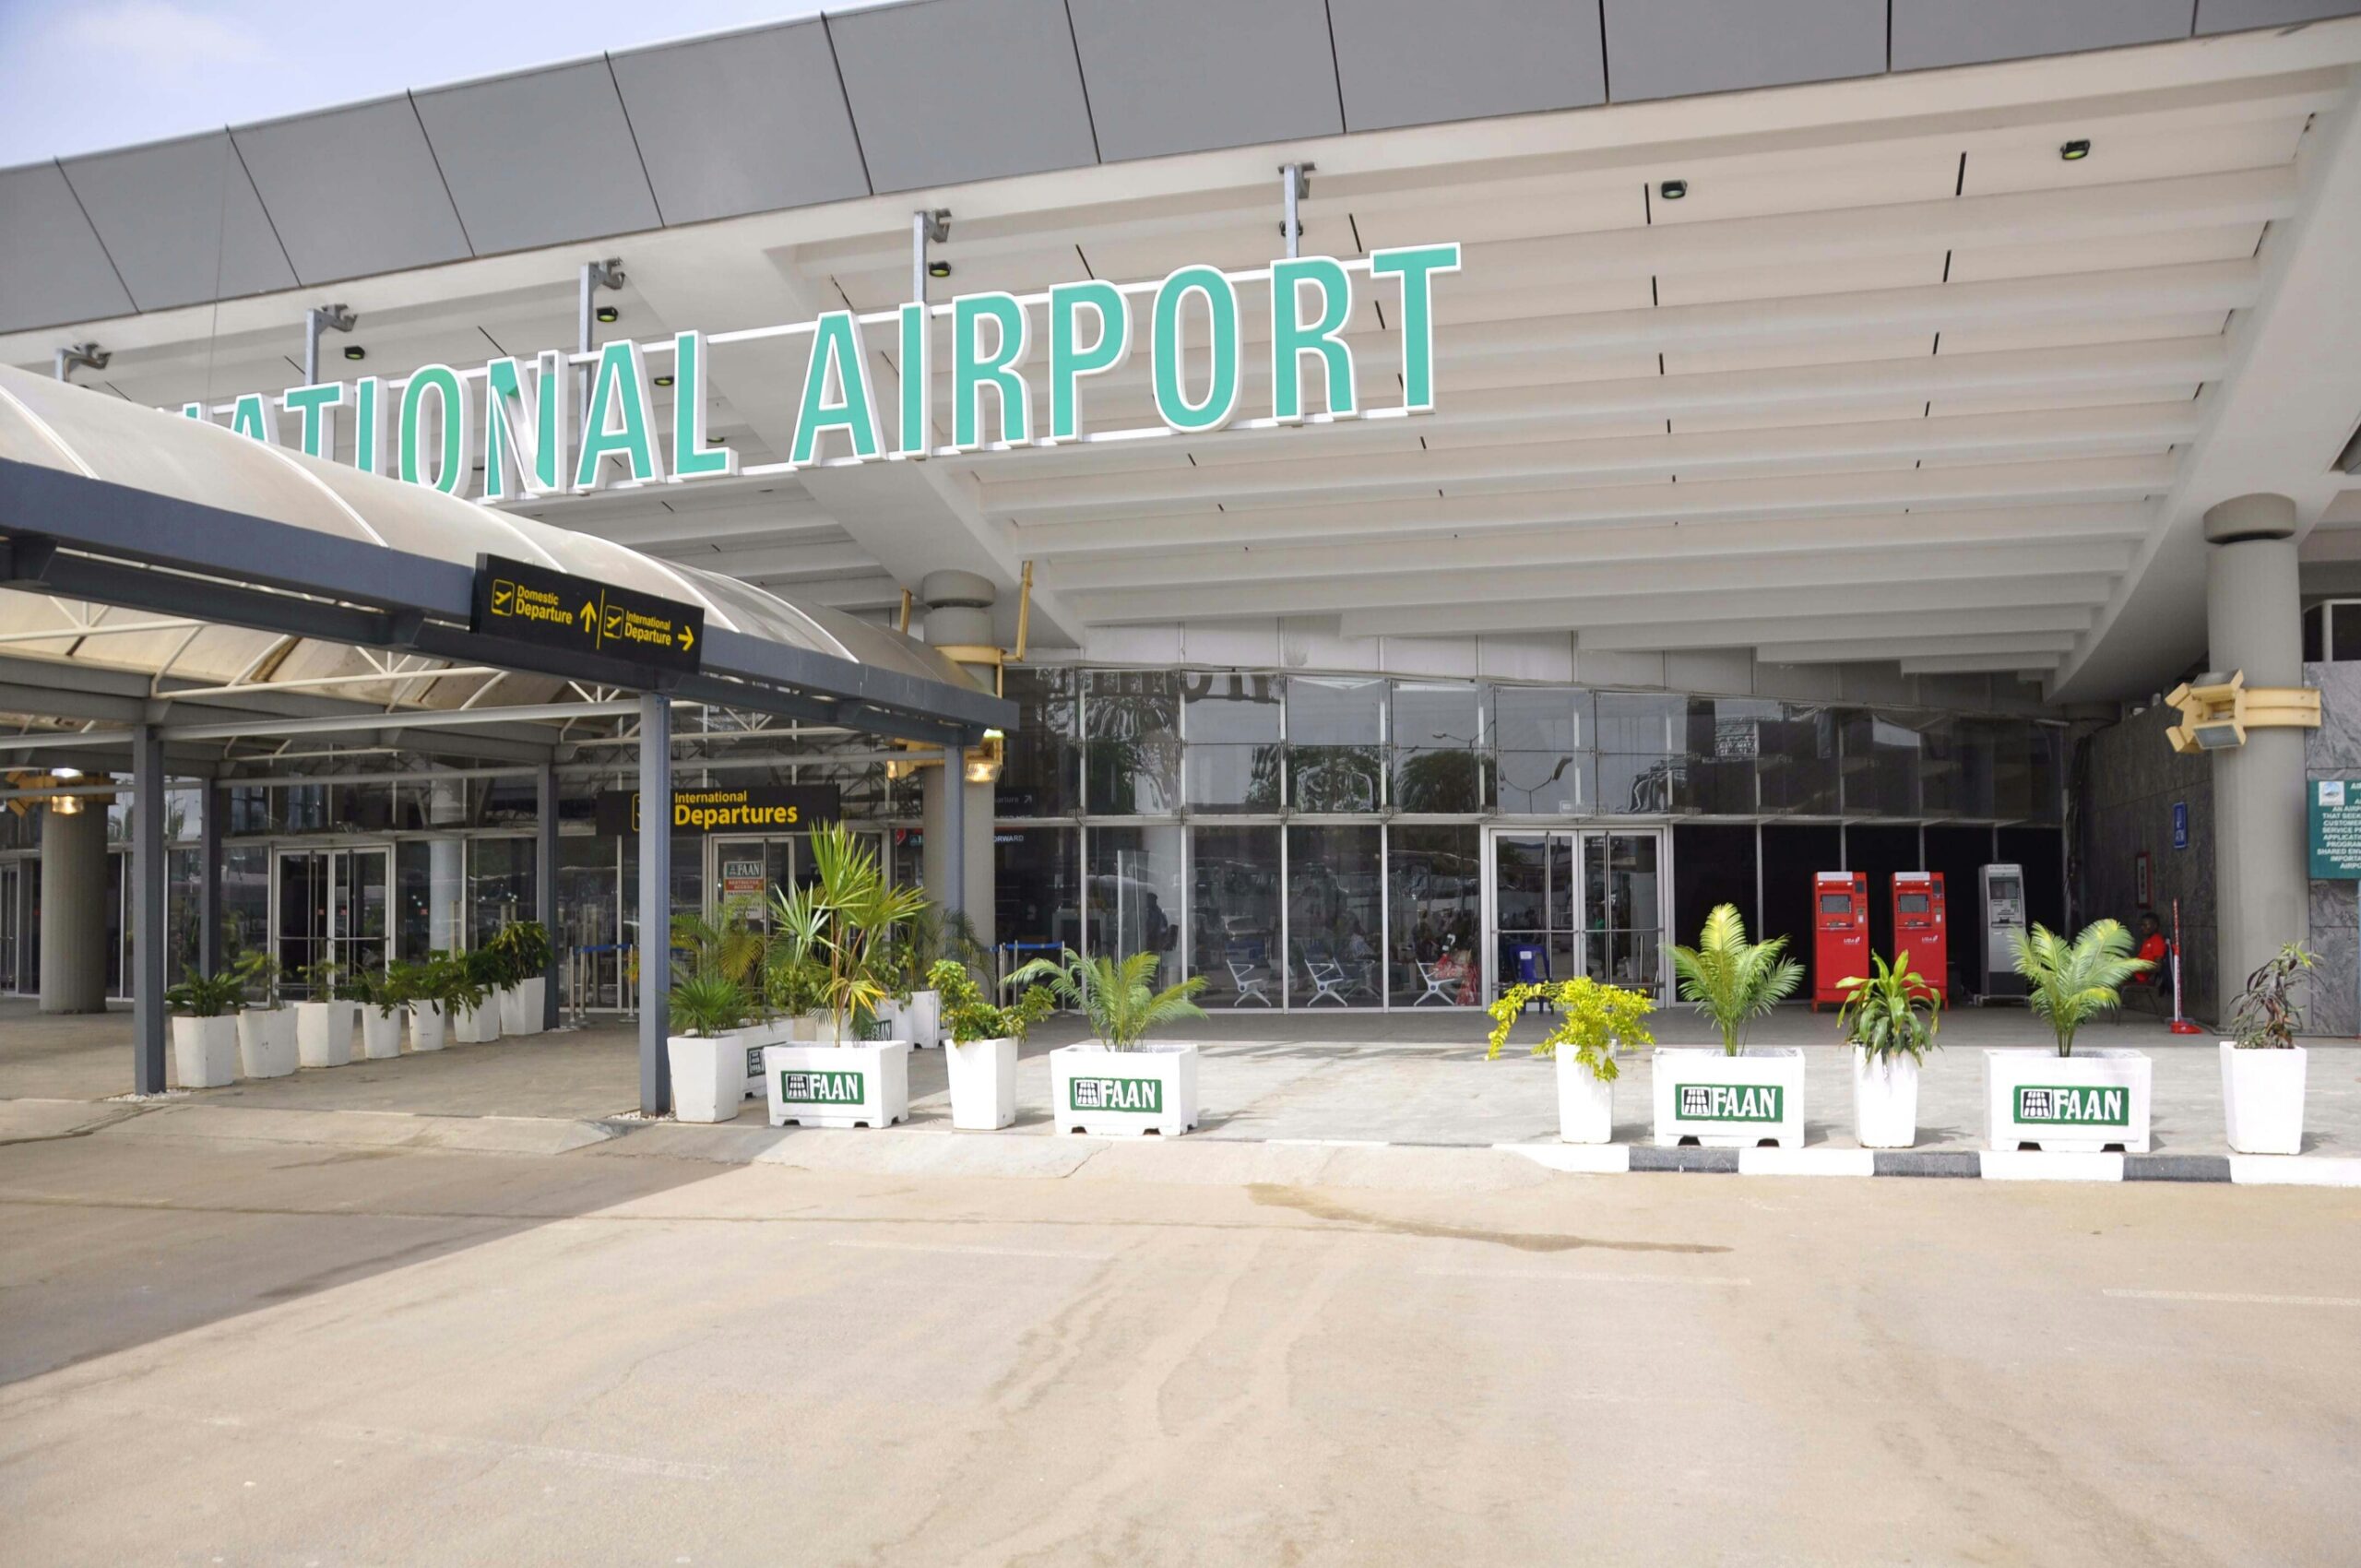 Senate: Reopening Of Airports On June 21 Unrealistic